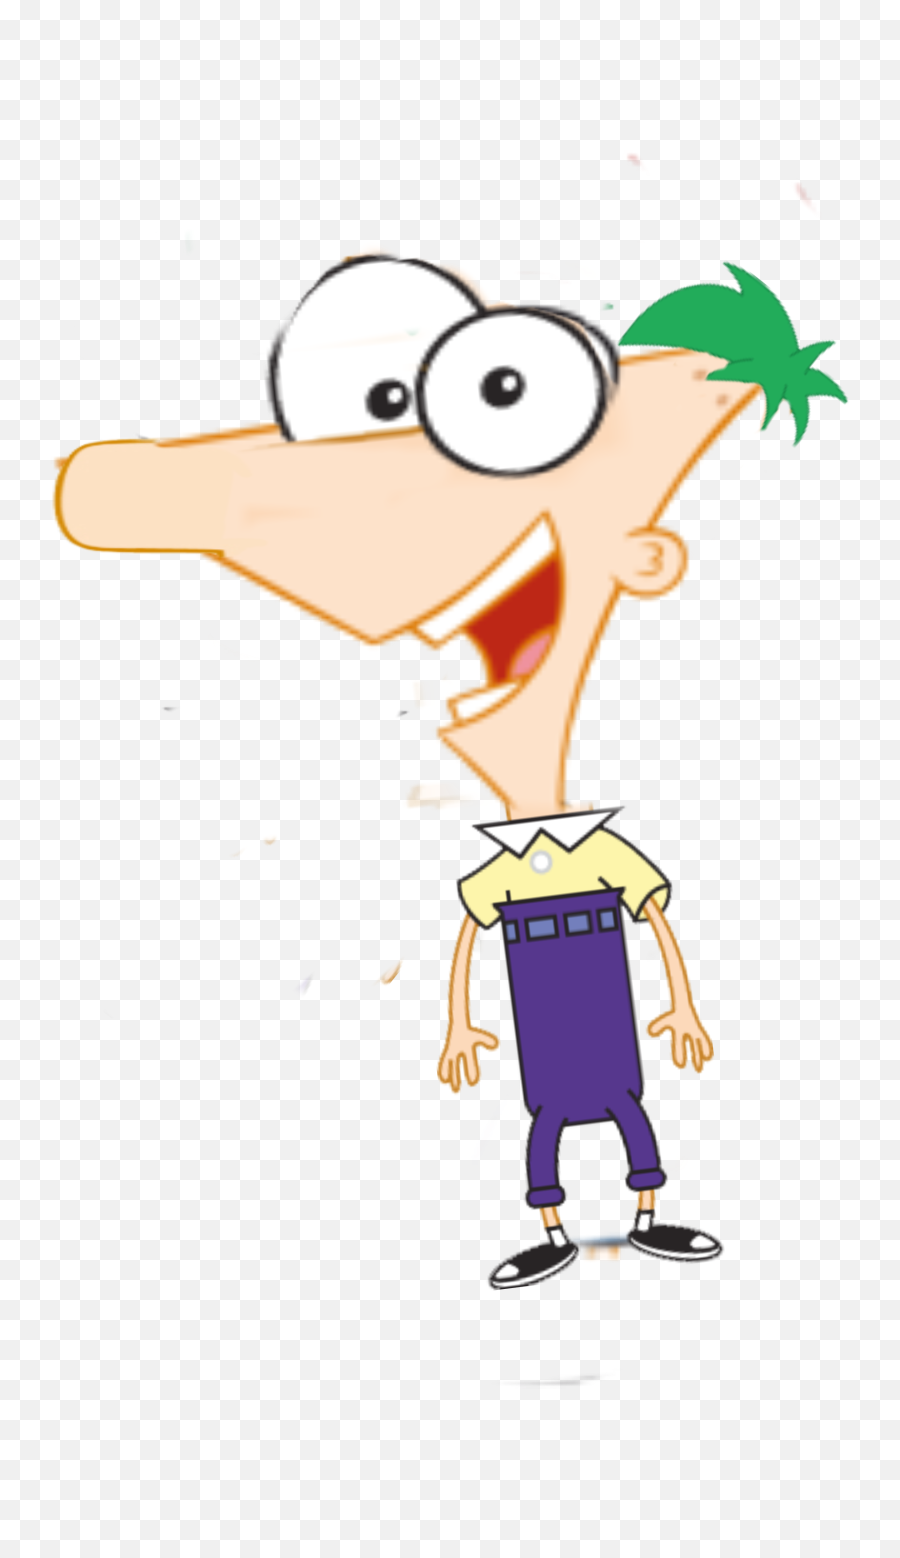 Phineas Ferb Phineasandferb Sticker By Blachite - Fictional Character Emoji,Phineas And Ferb Logo